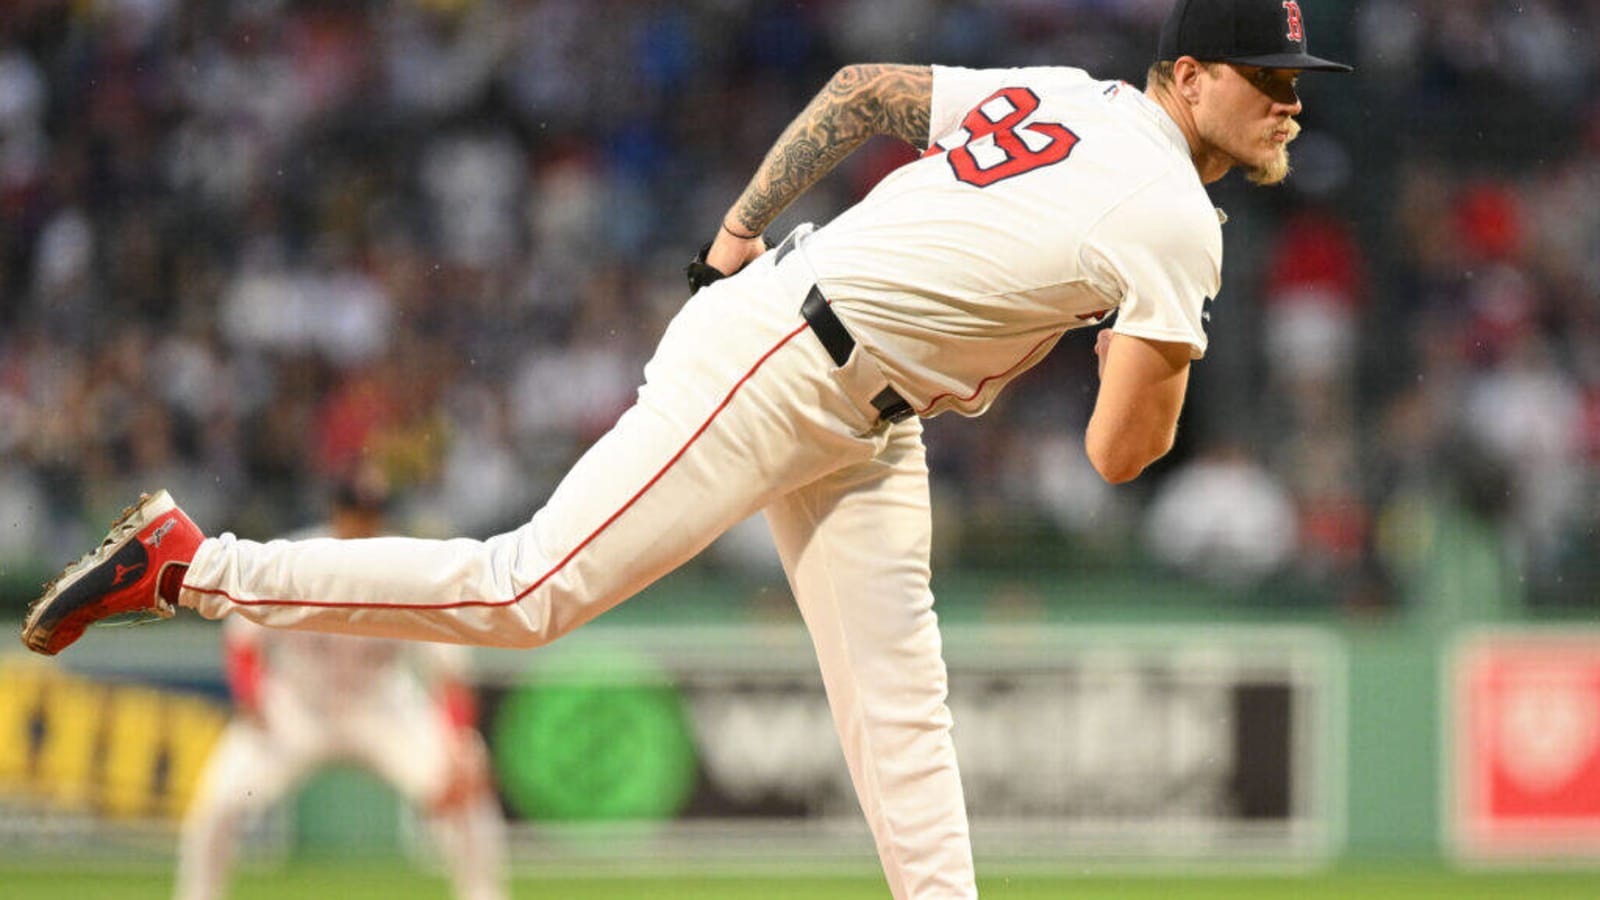 Red Sox Pitcher Joins Elite List With Dominant Sunday Night Baseball Performance